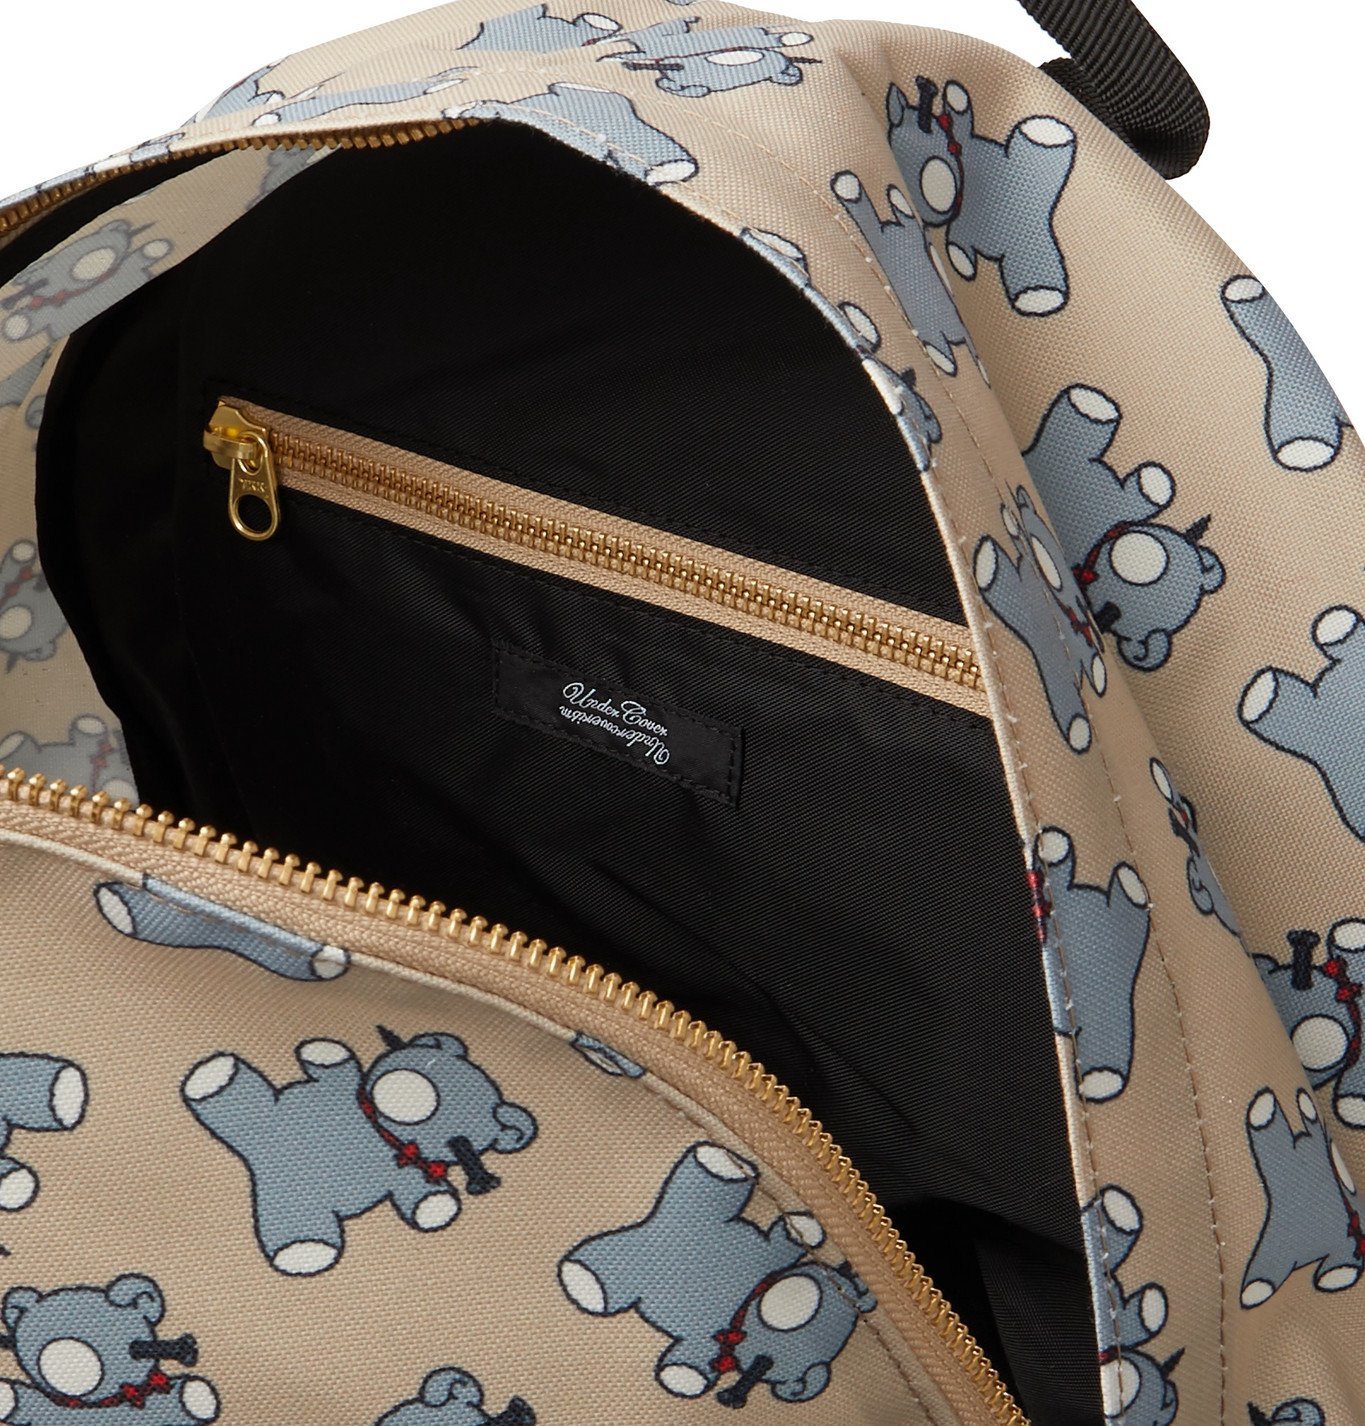 Undercover - Screwbear Printed Canvas Backpack - Neutrals Undercover